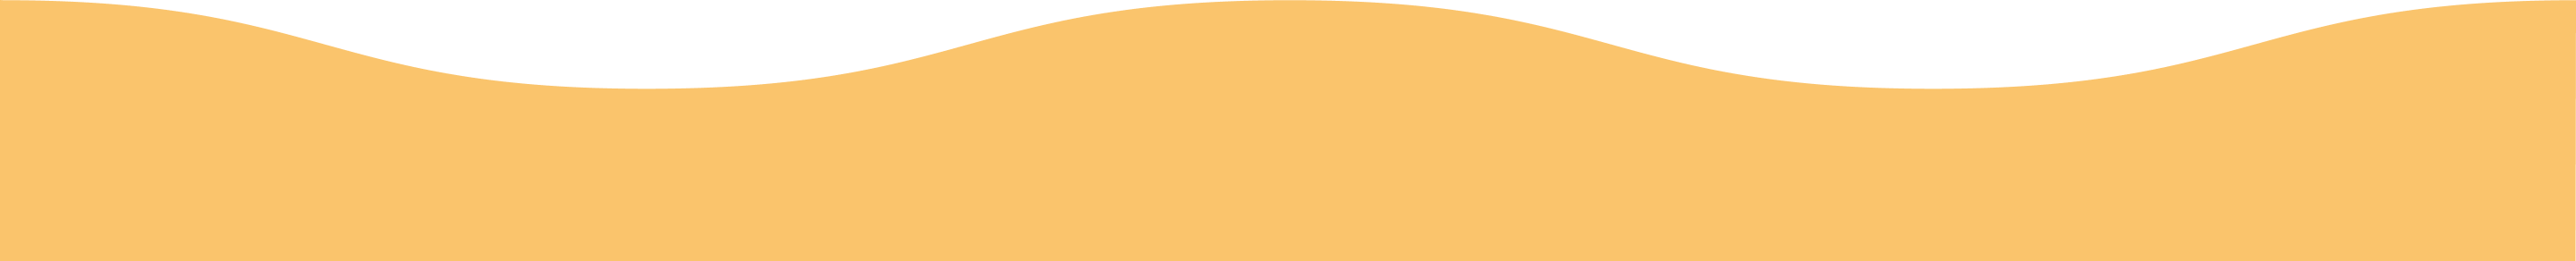 Curved yellow border